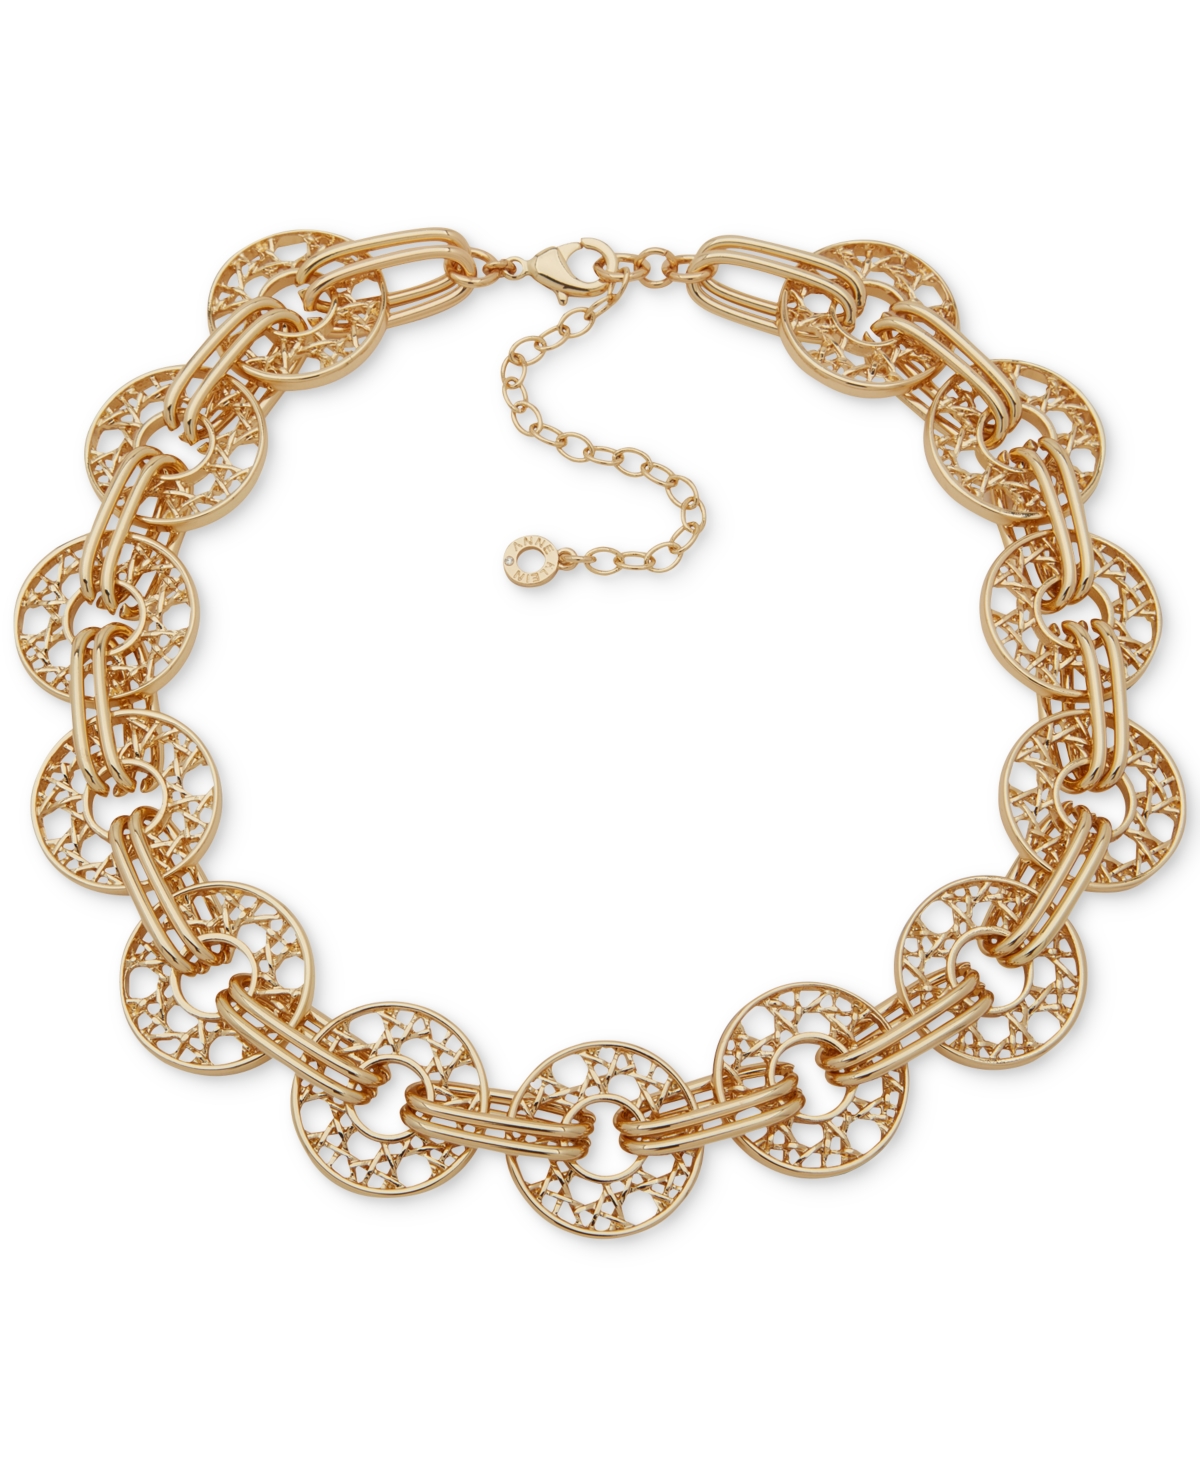 Gold-Tone Woven Ring Collar Necklace, 16" + 3" extender - Gold